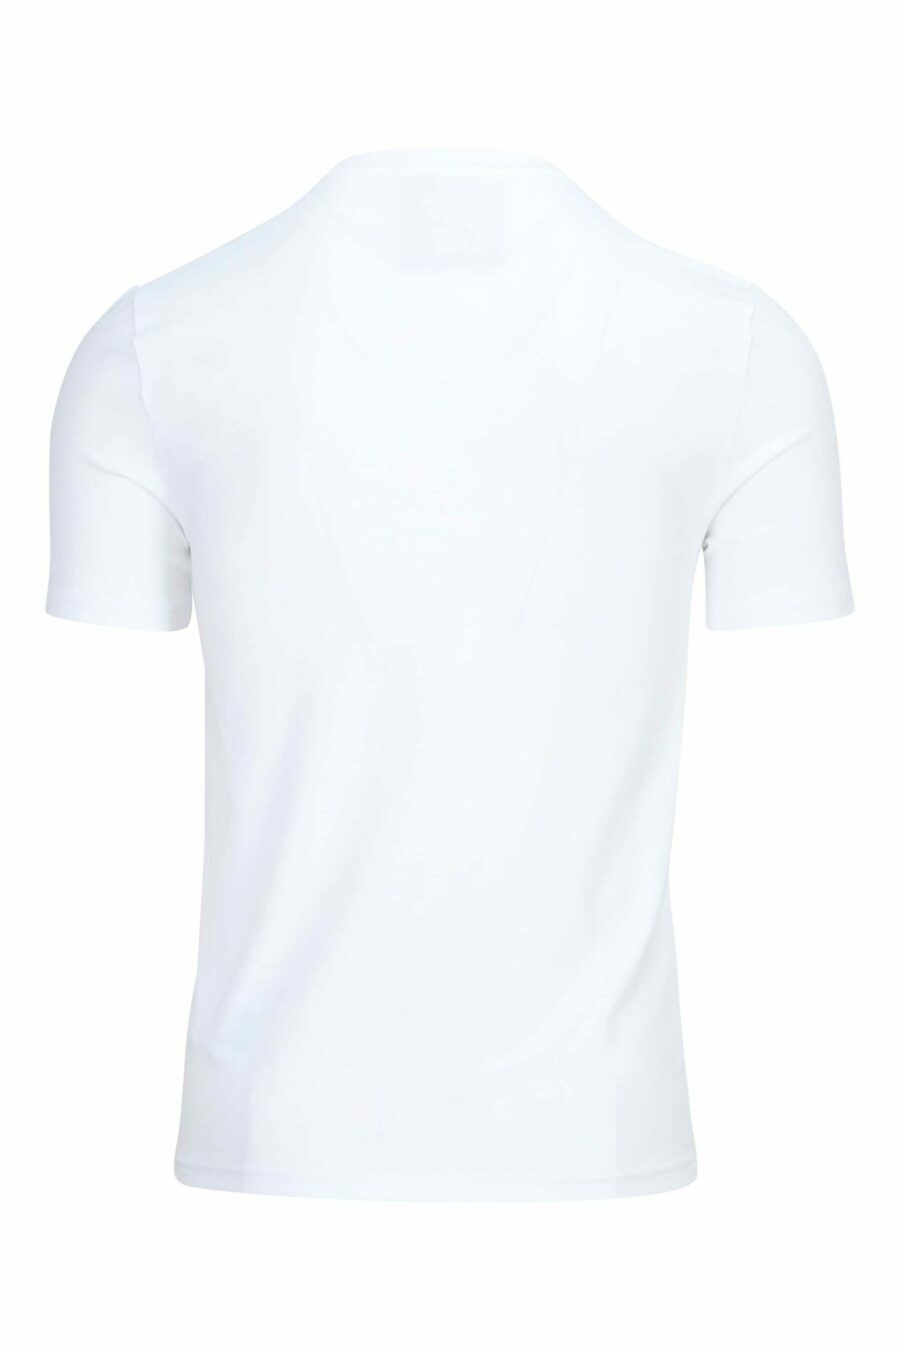 White T-shirt with classic black maxilogue - 889316934960 1 scaled